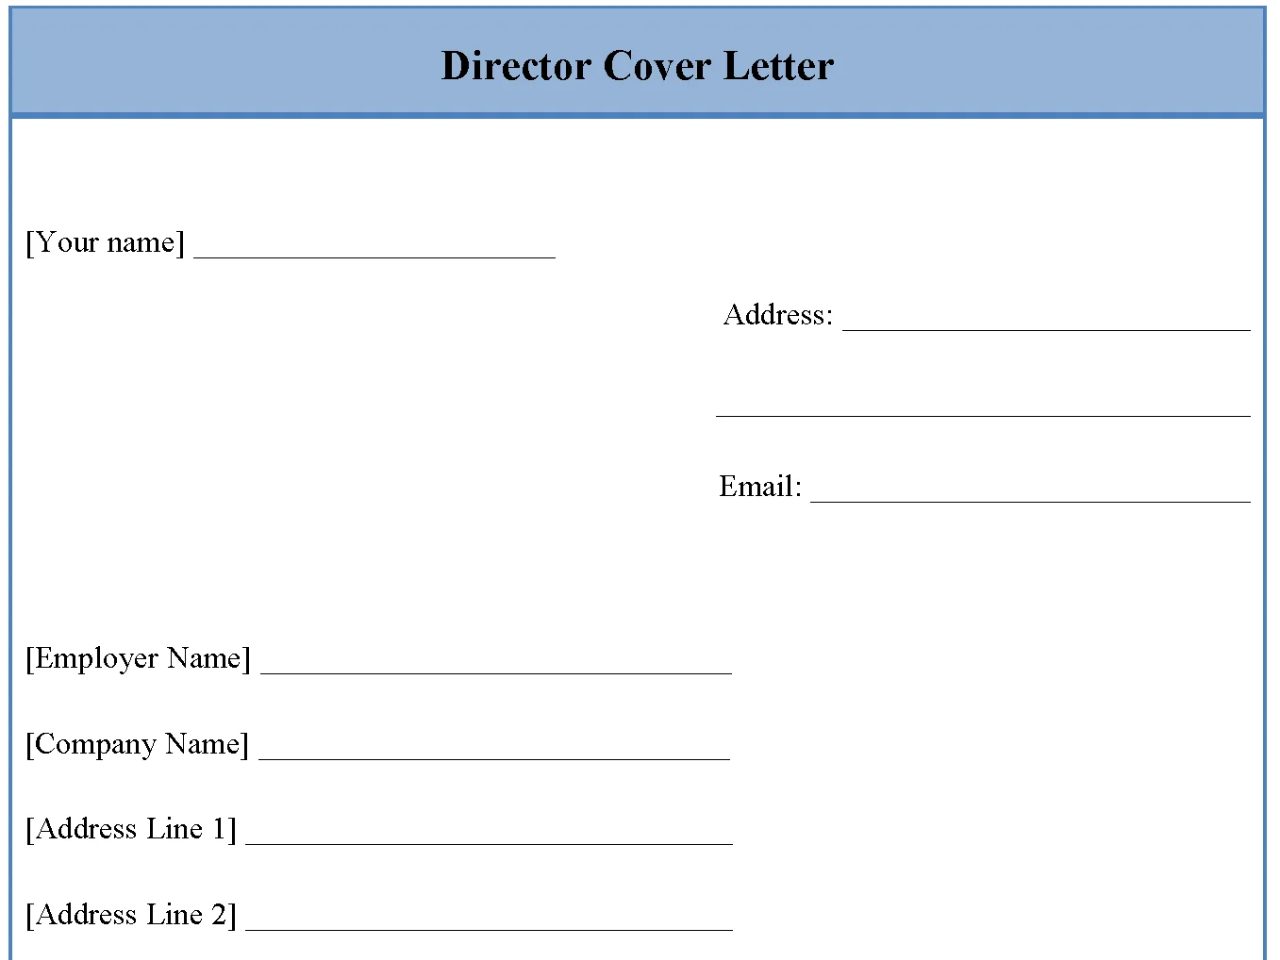 Director Cover Letter Template